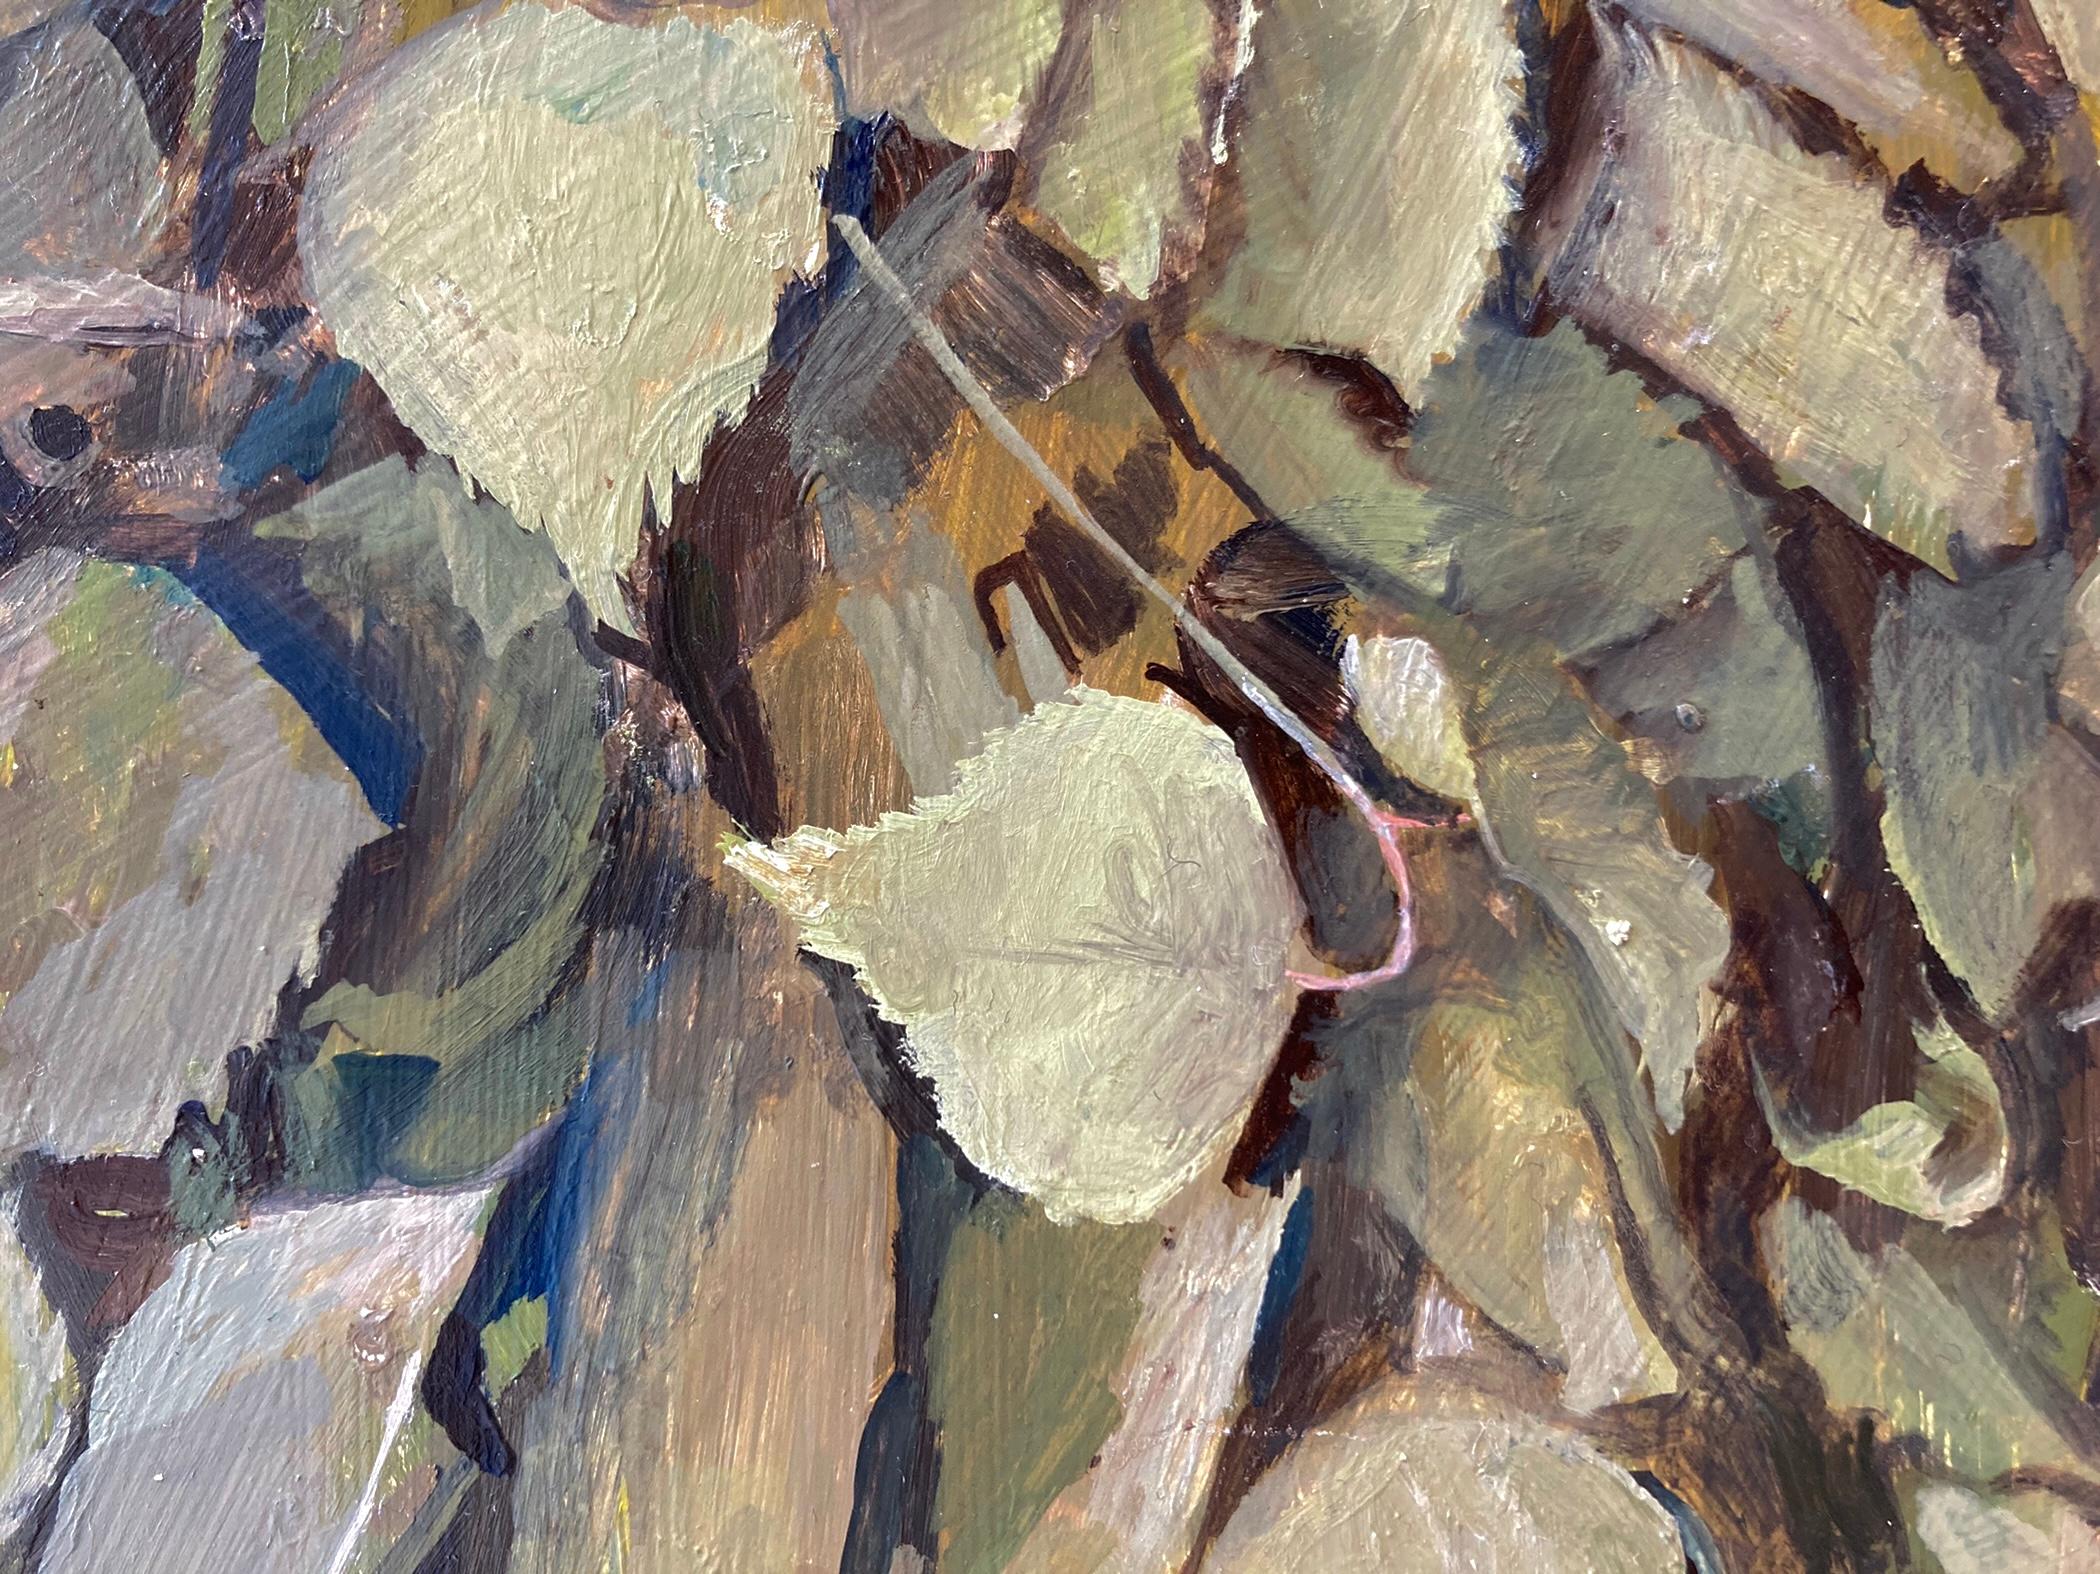 An oil painting created from direct observation. A bound branch of birch leaves, secured with a length of twine and hung upon a white wall for observation. A soft shadow is cast by the leaves, as if painted in diffused daylight. Birch branches, or